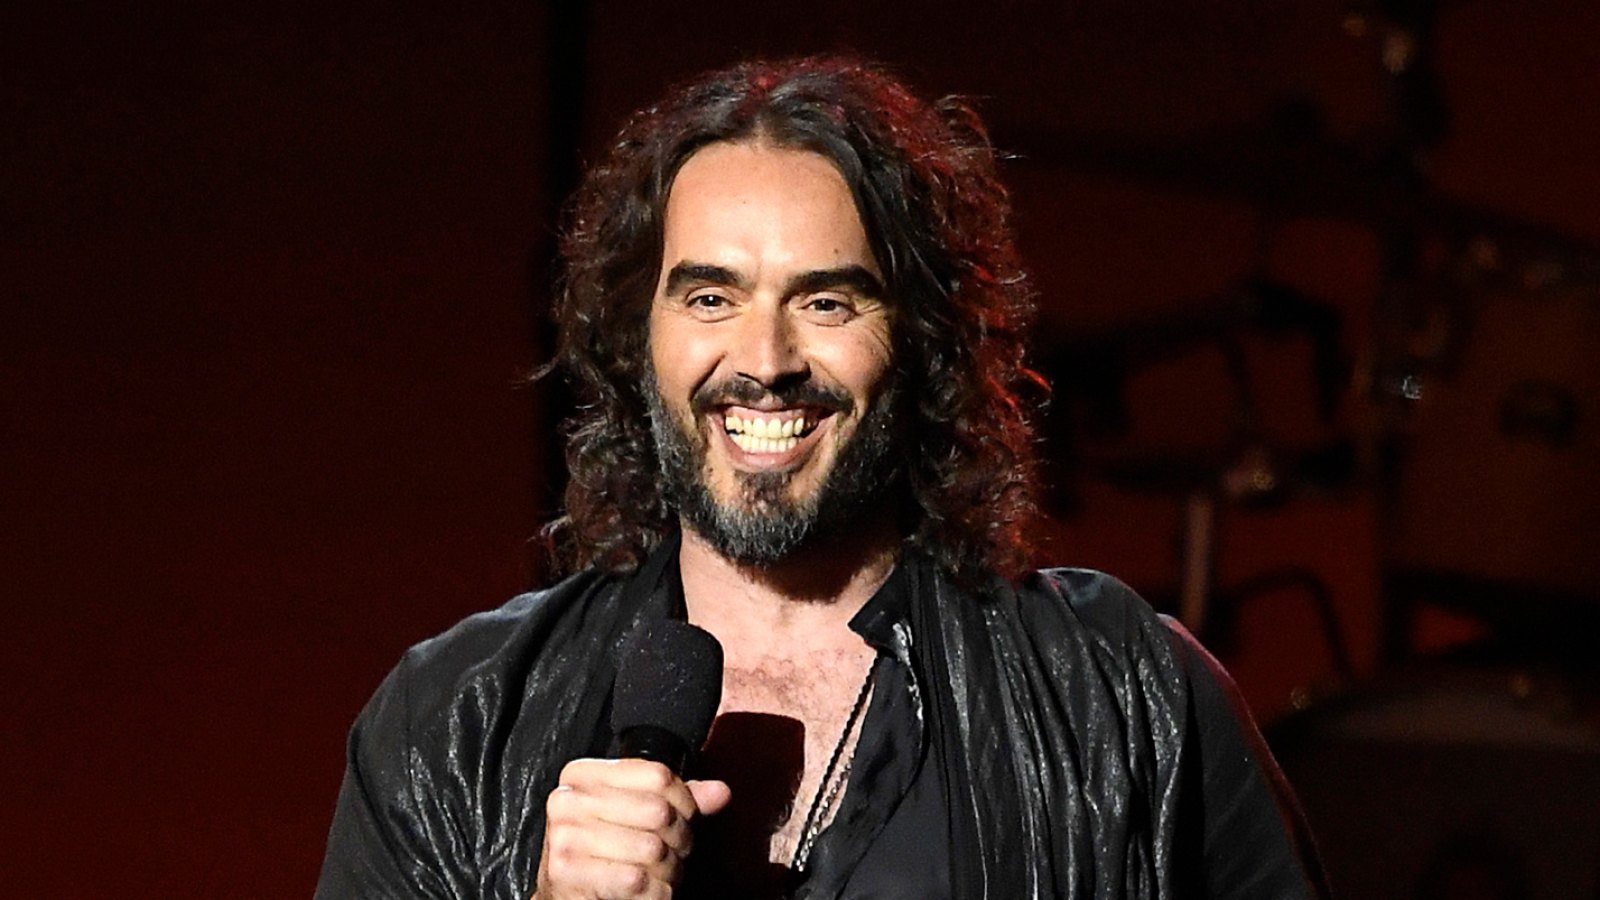 Russell Brand Receives Standing Ovation at U.K. Comedy Show Hours After Sexual Assault Scandal